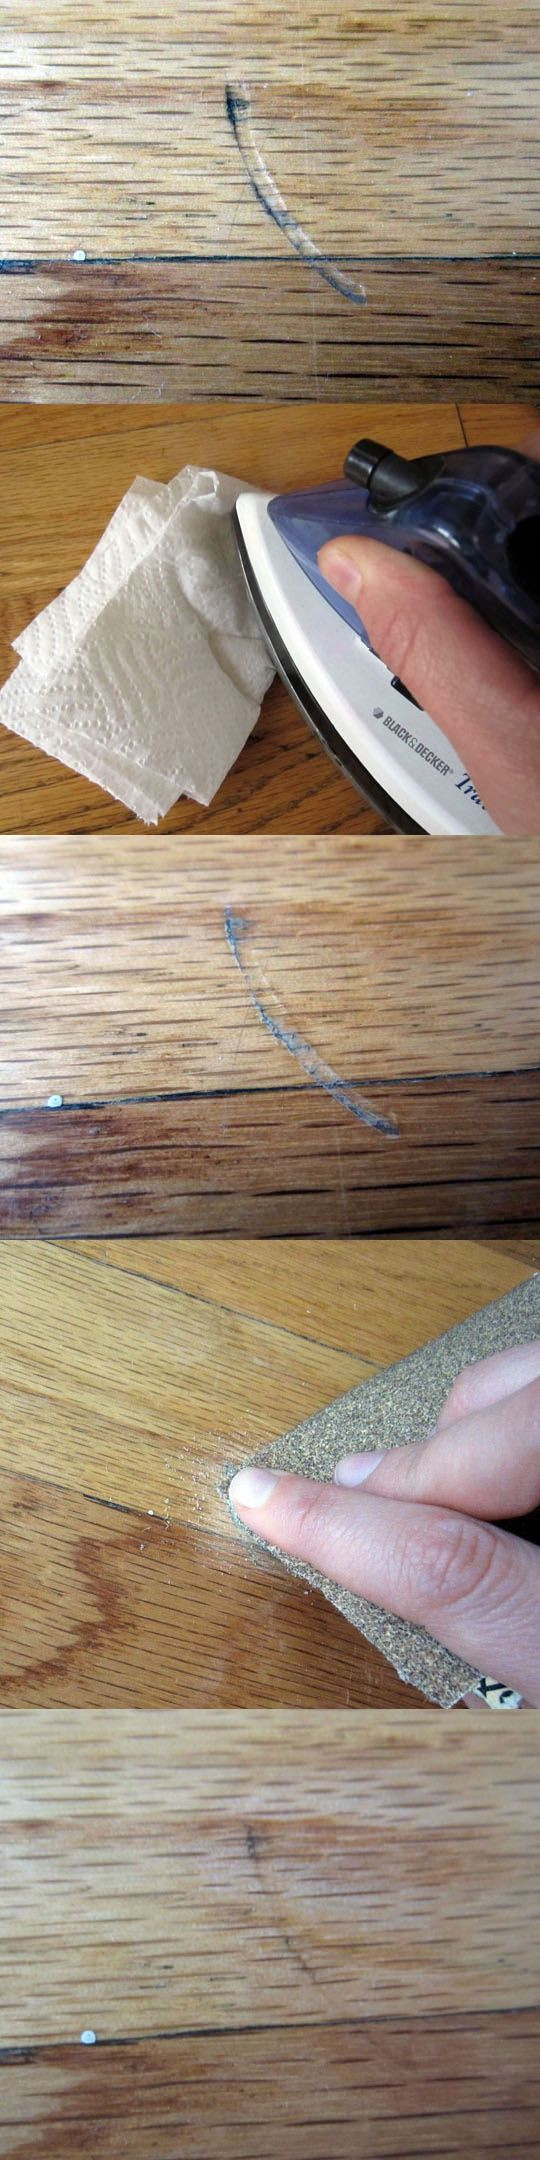 How To Restore Hardwood Floors DIY
 How To Fix Dents in Wooden Floors & Furniture With an